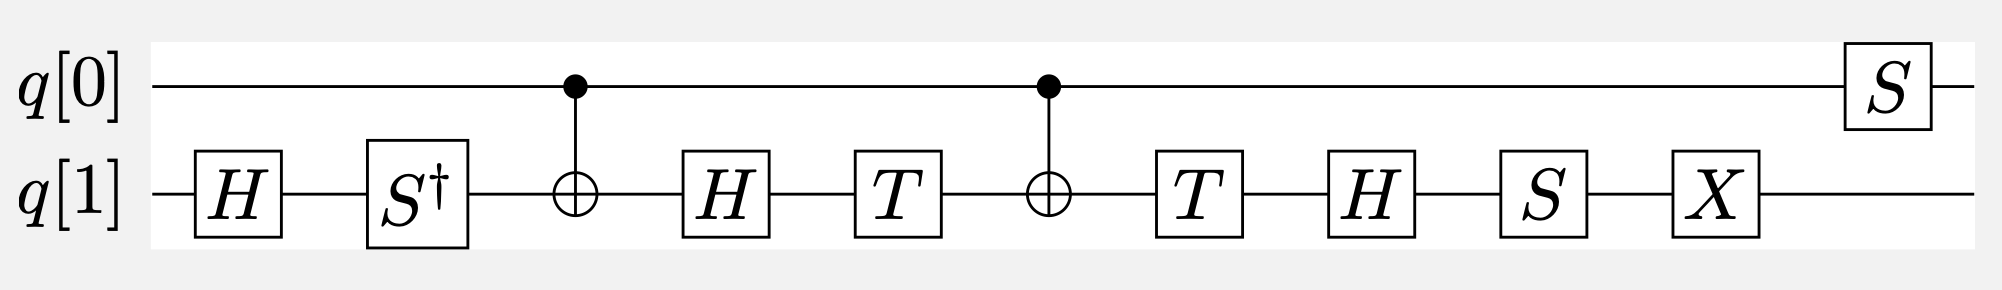 equivalent gate sequence for a controlled Hadamard gate